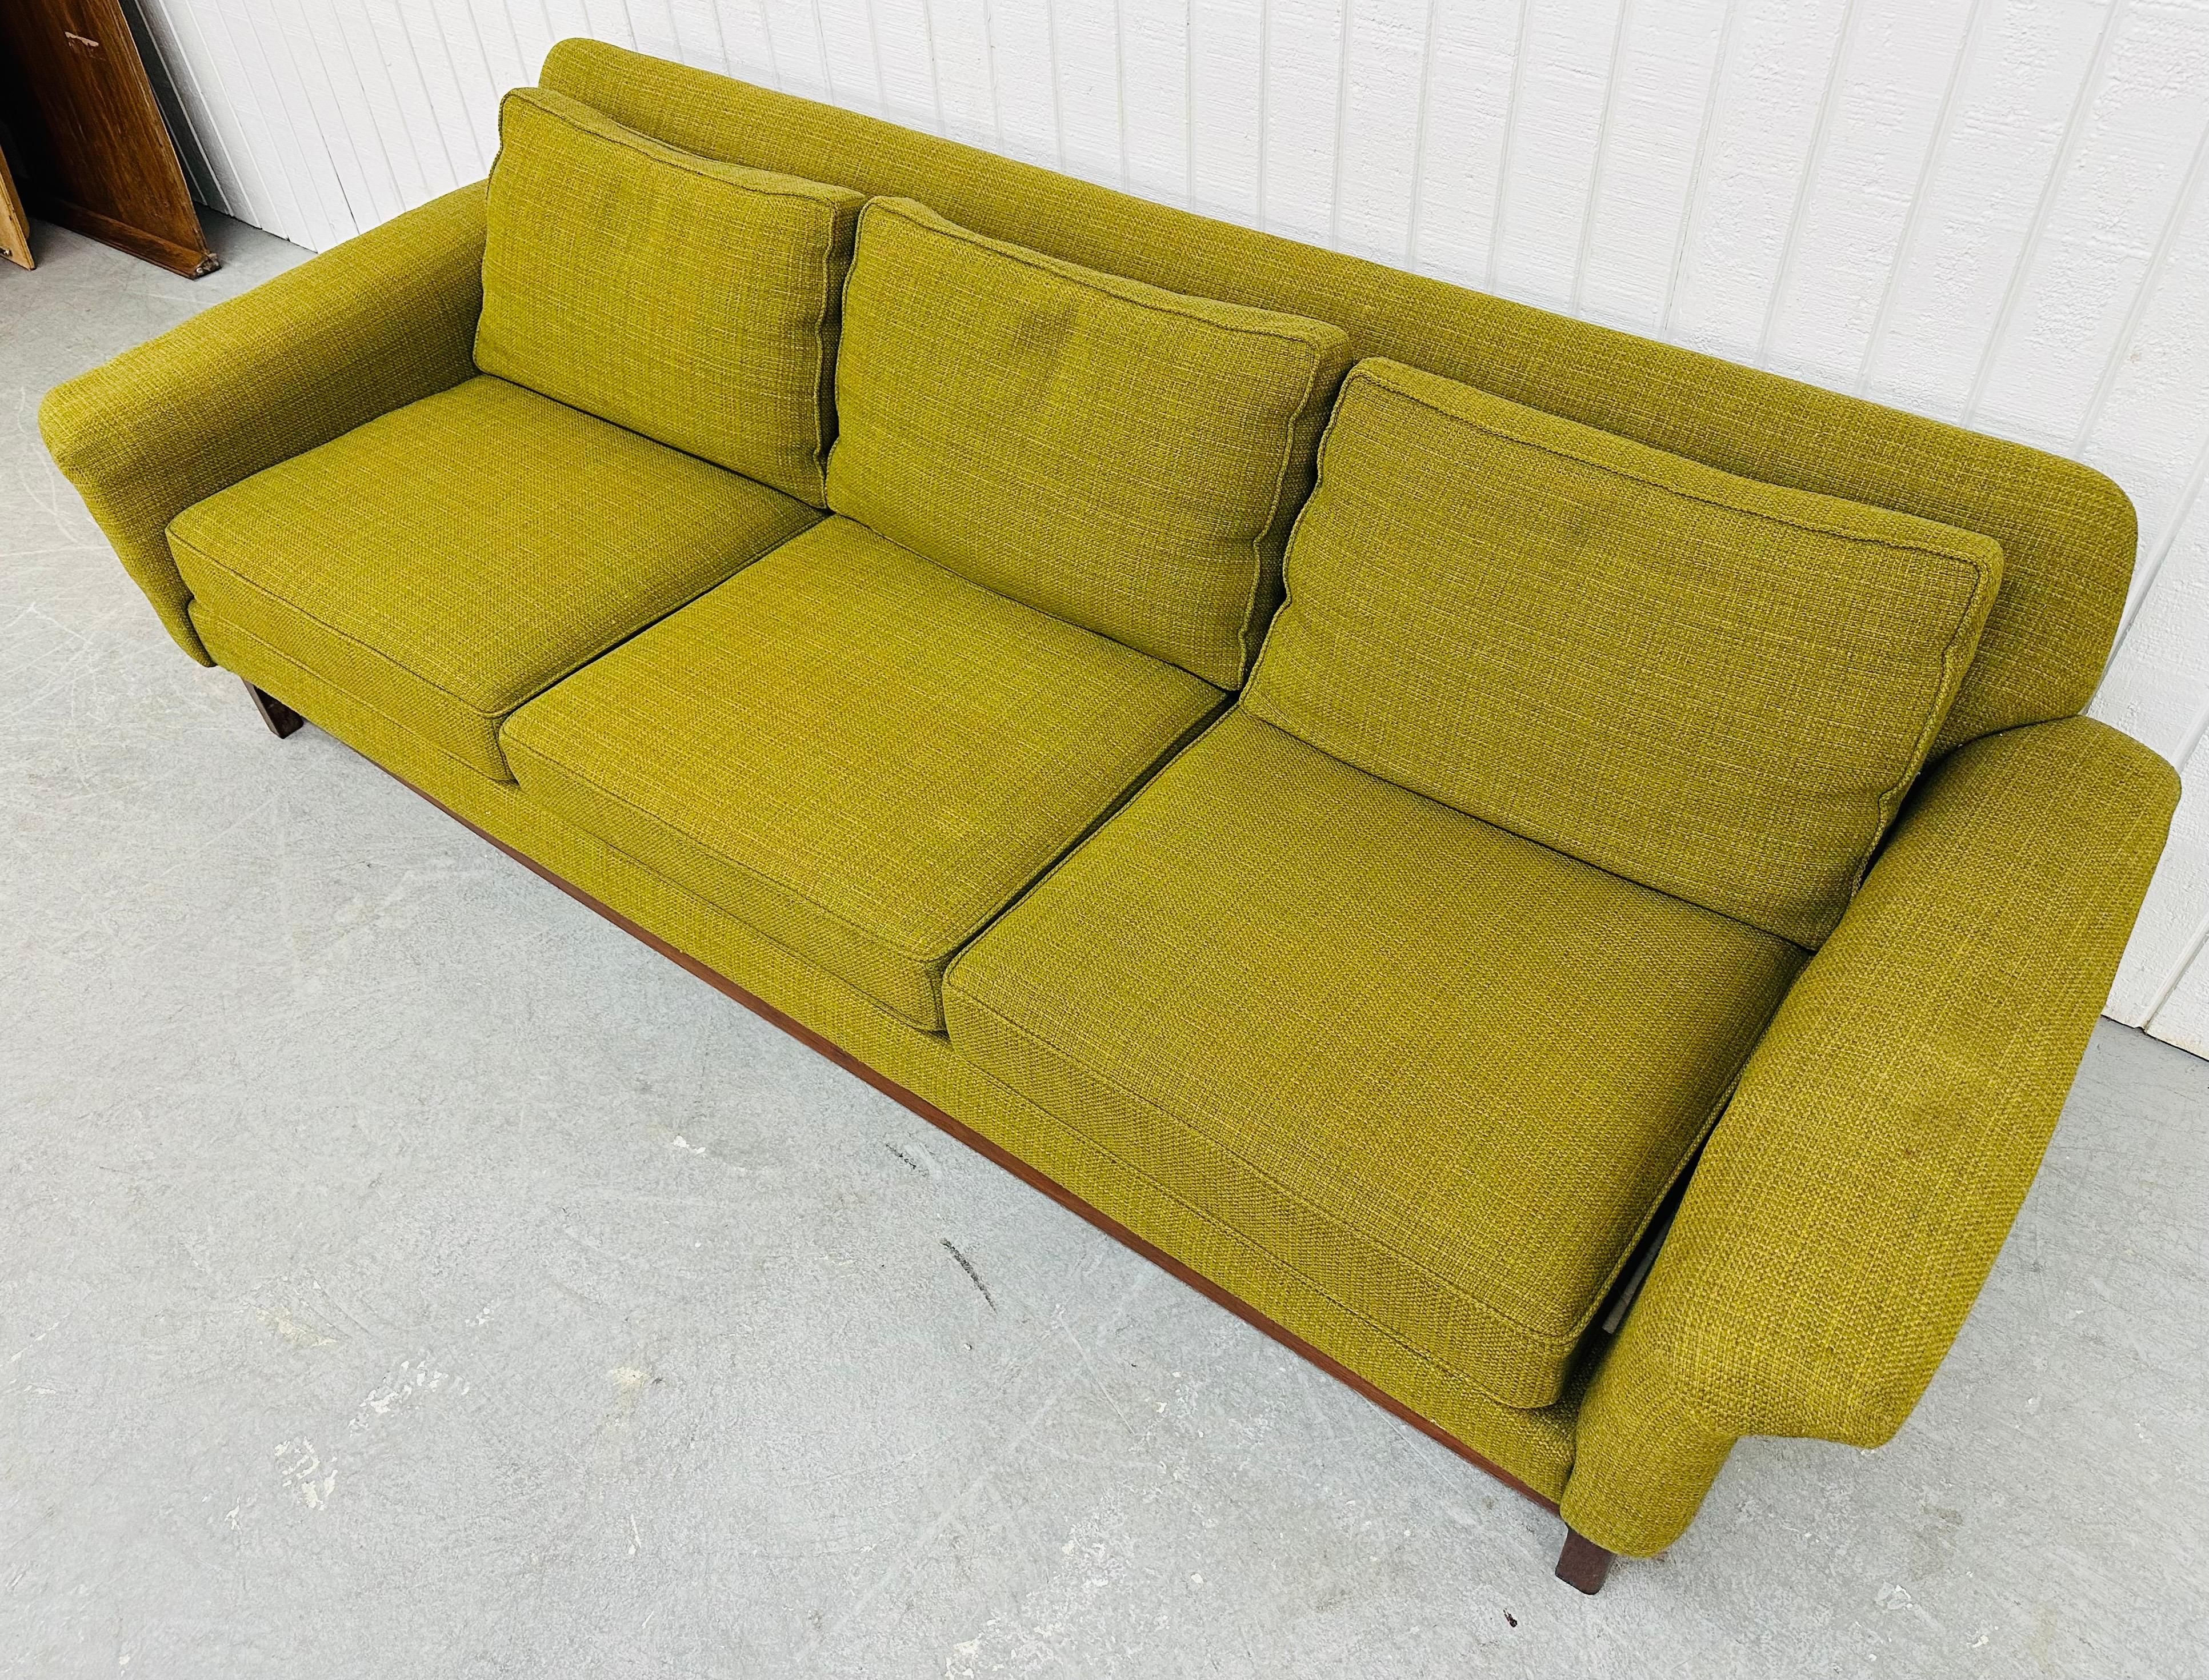 This listing is for a Mid-Century Modern Dux Sofa. Featuring a straight line design, original green upholstery, walnut legs, curved arm rests, and original DUX tag. This is an exceptional combination of quality and design by DUX.